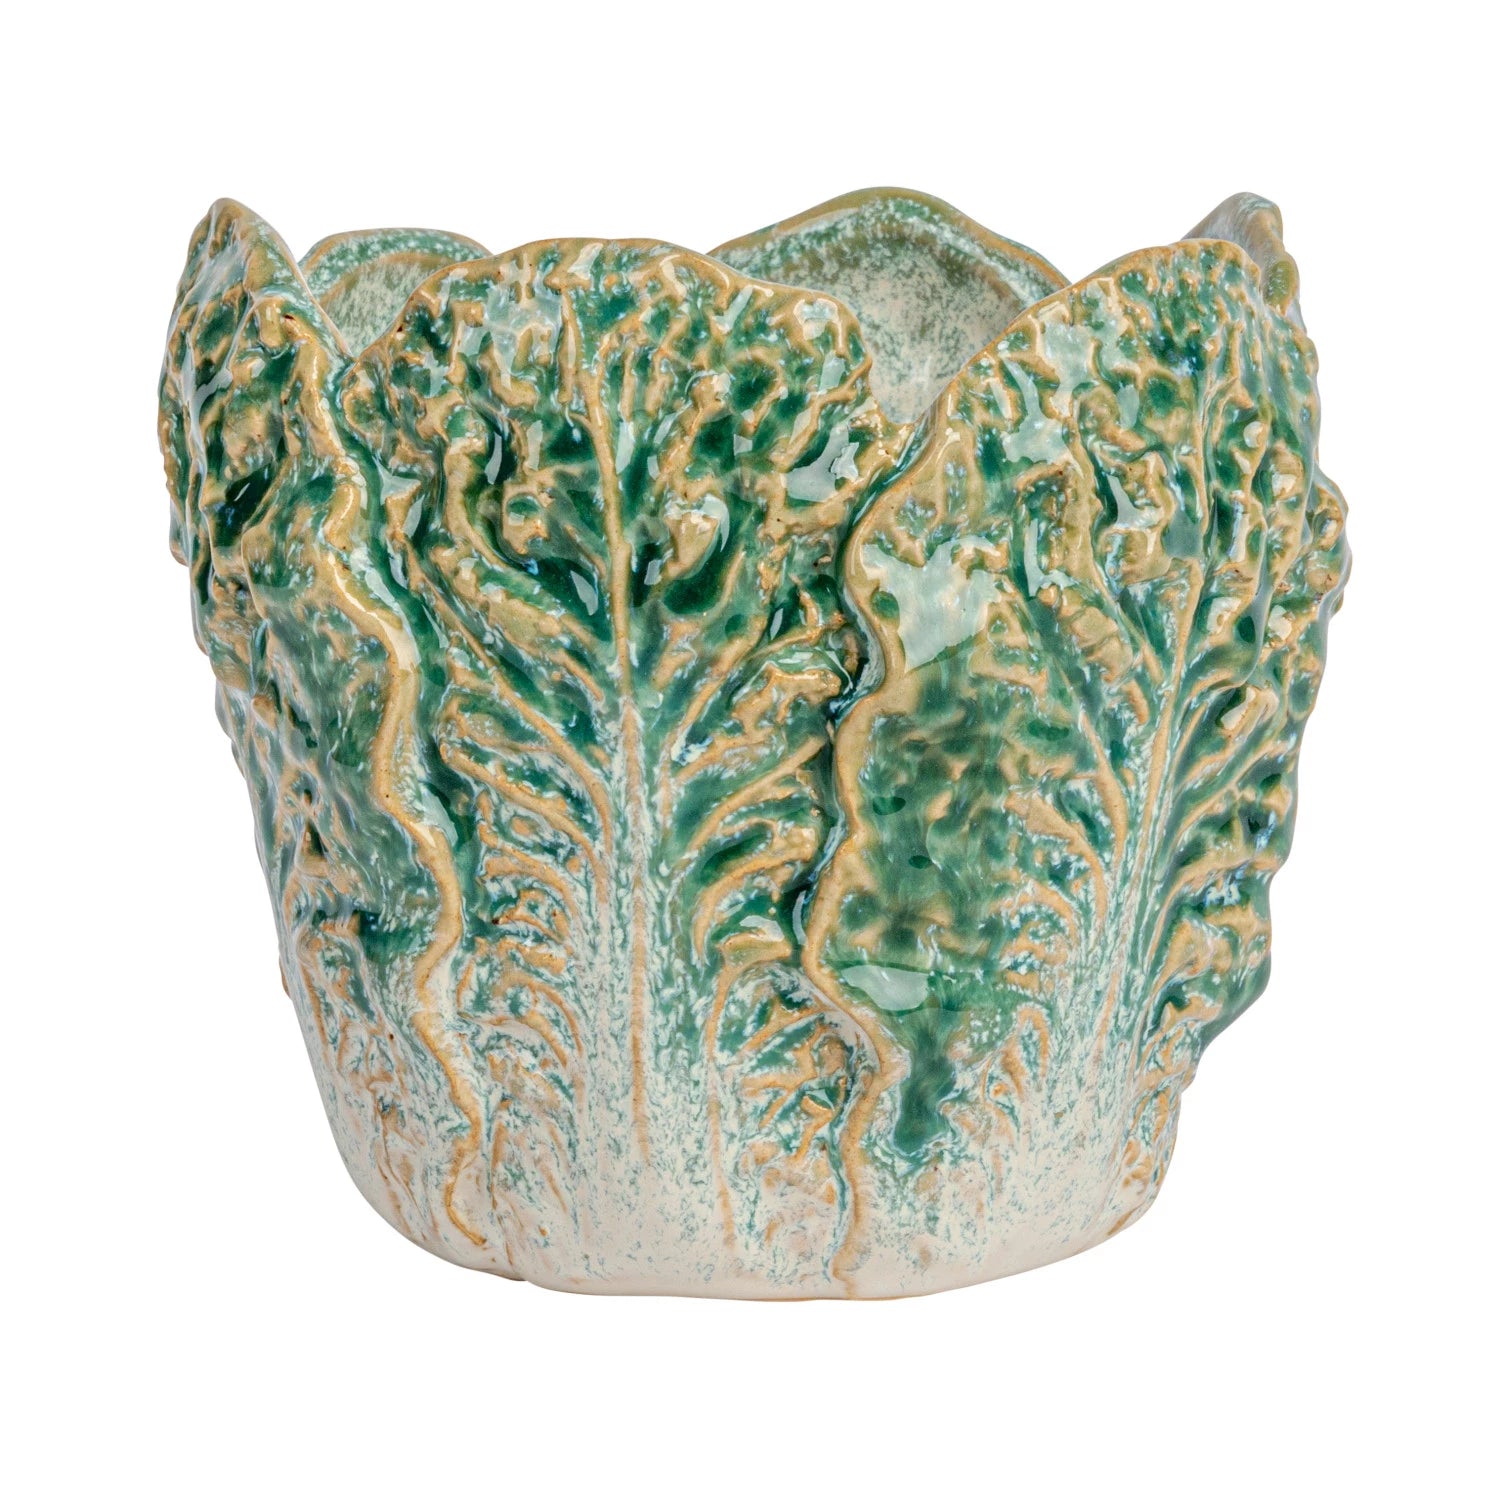 Side view of the stoneware cabbage shaped plant pot.